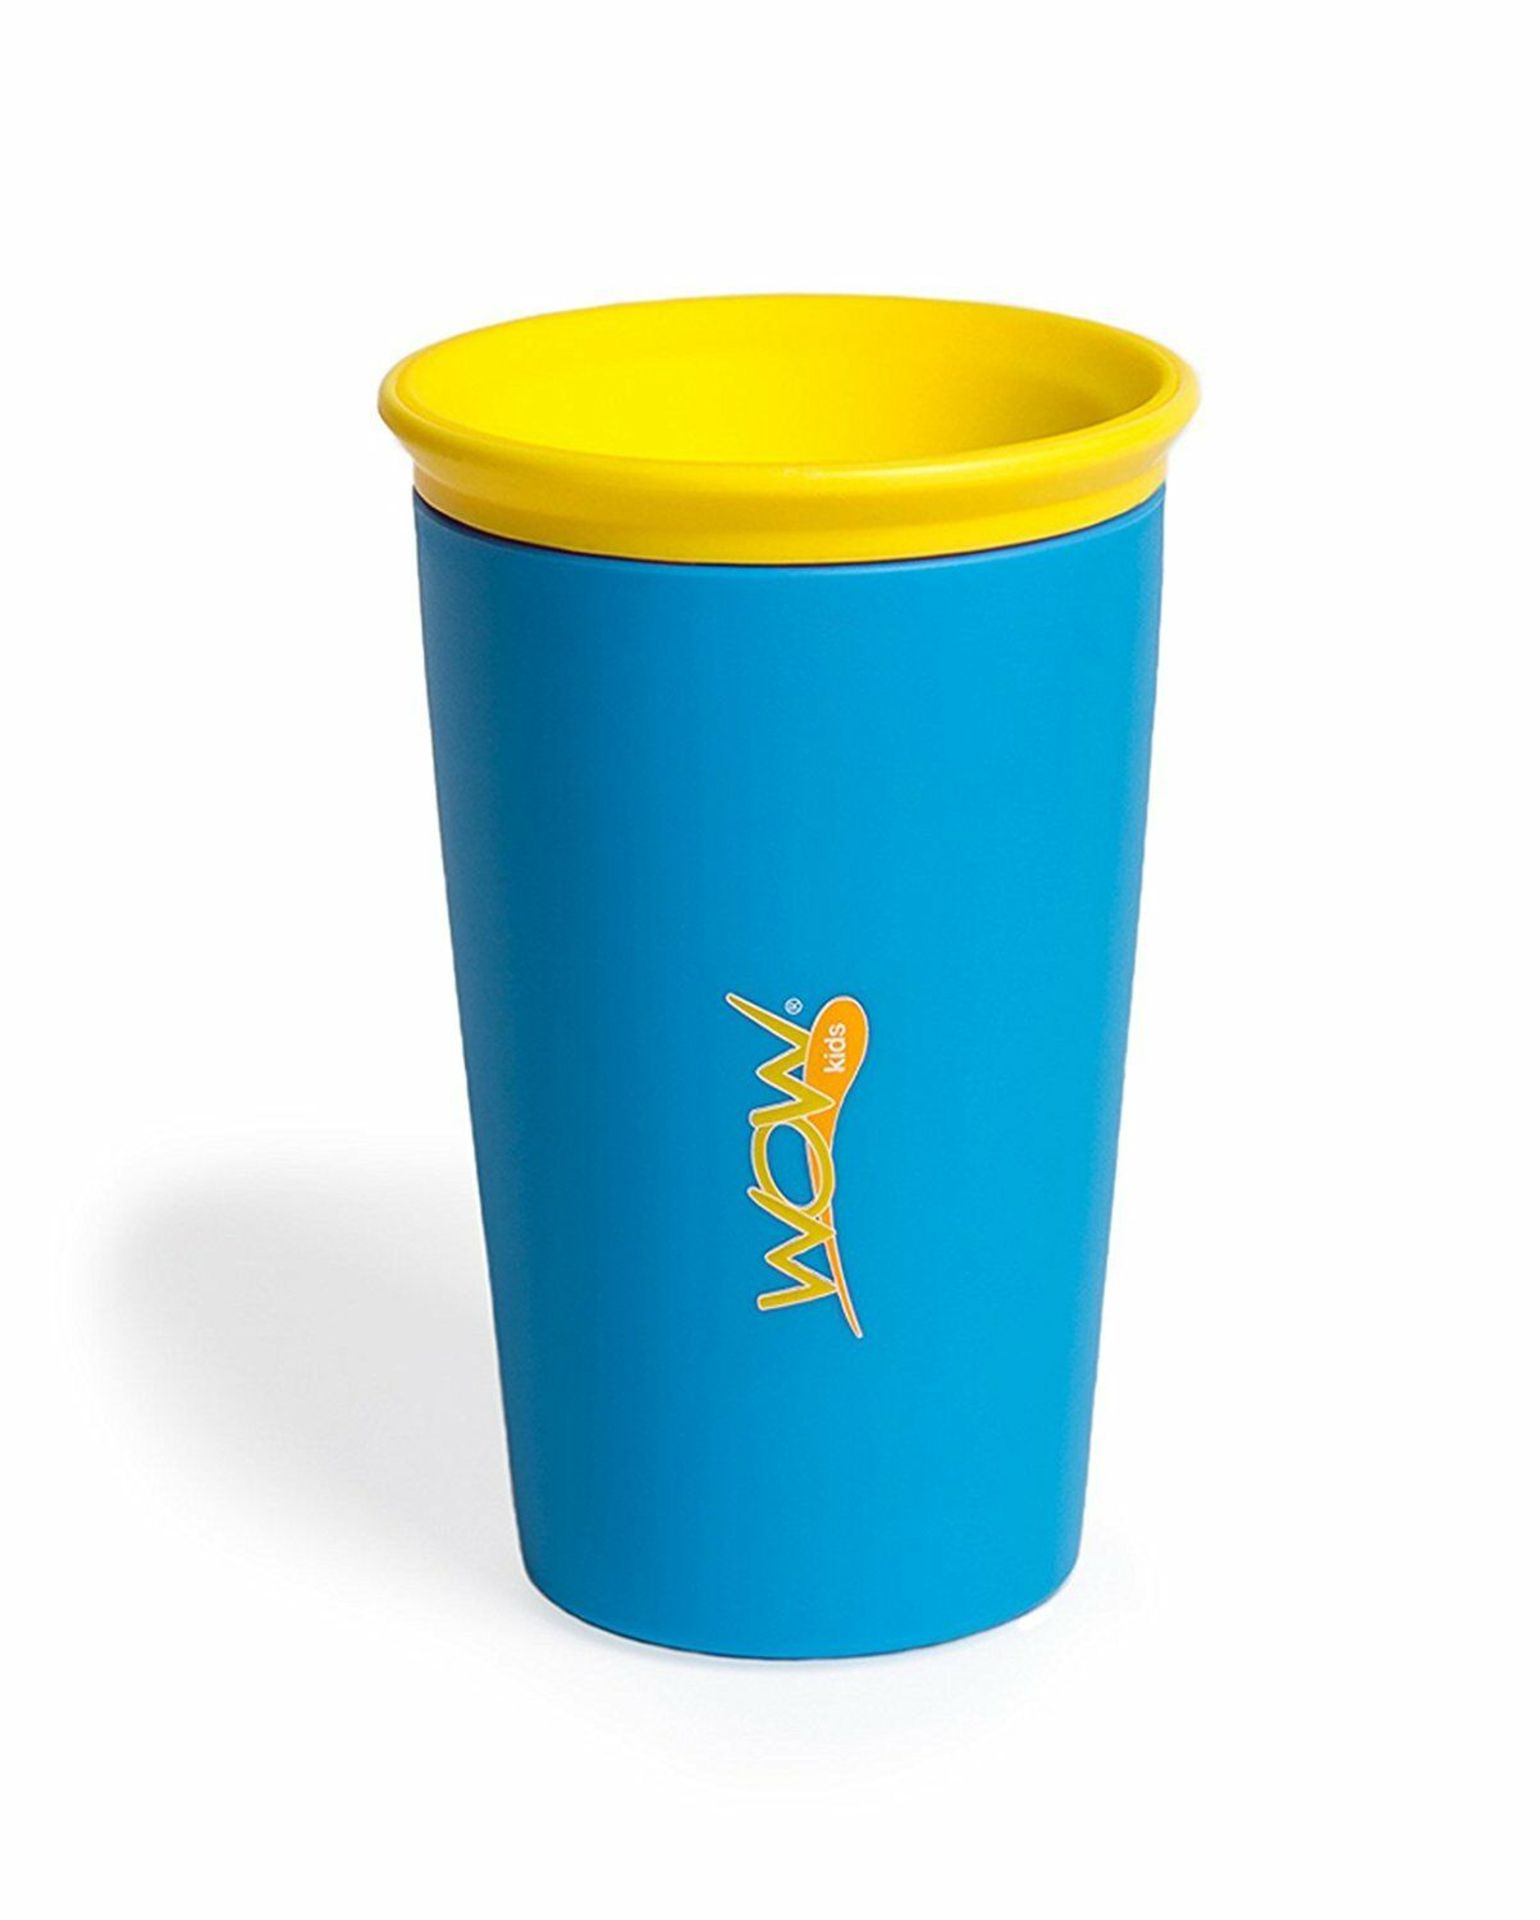 240 X SPILL FREE DRINKING CUP FOR KIDS -WOW INNOVATIVE DIFFERENT COLORS - RRP £1680 - Image 6 of 8